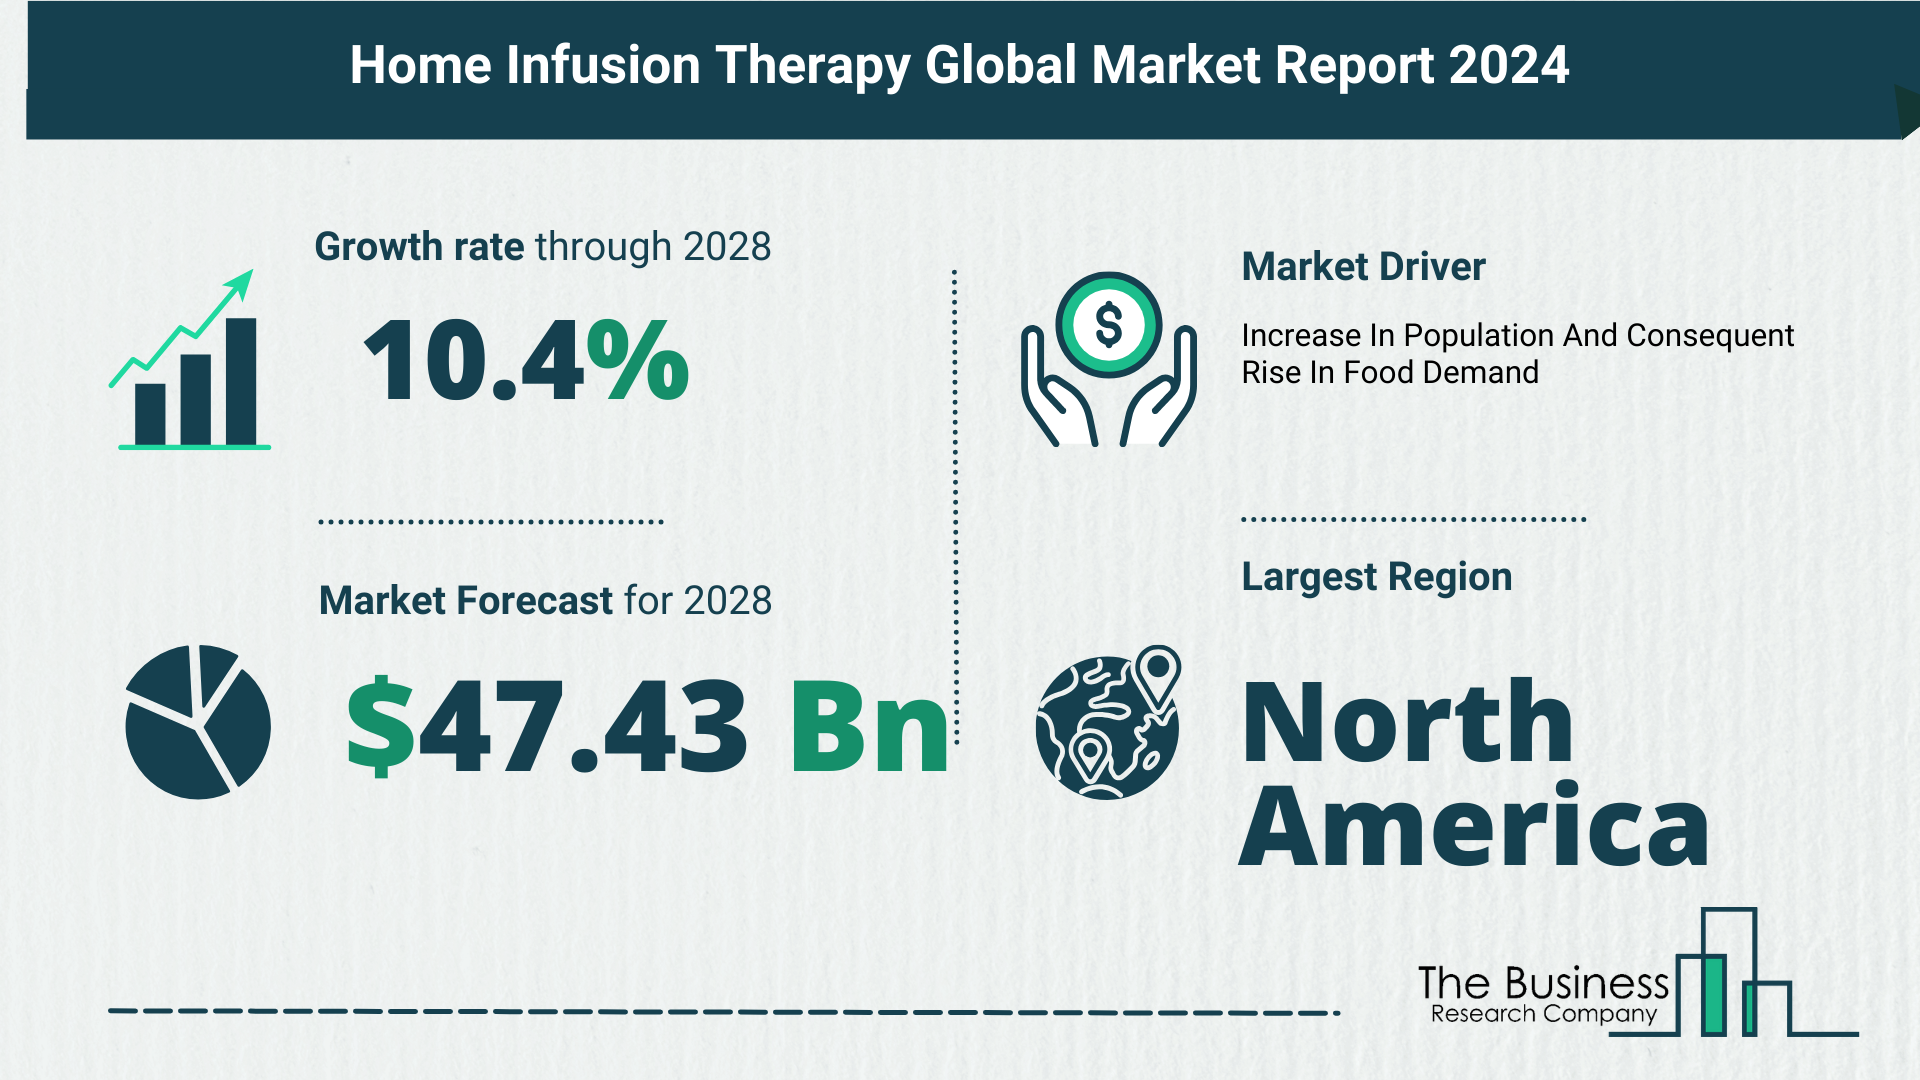 Key Takeaways From The Global Home Infusion Therapy Market Forecast 2024